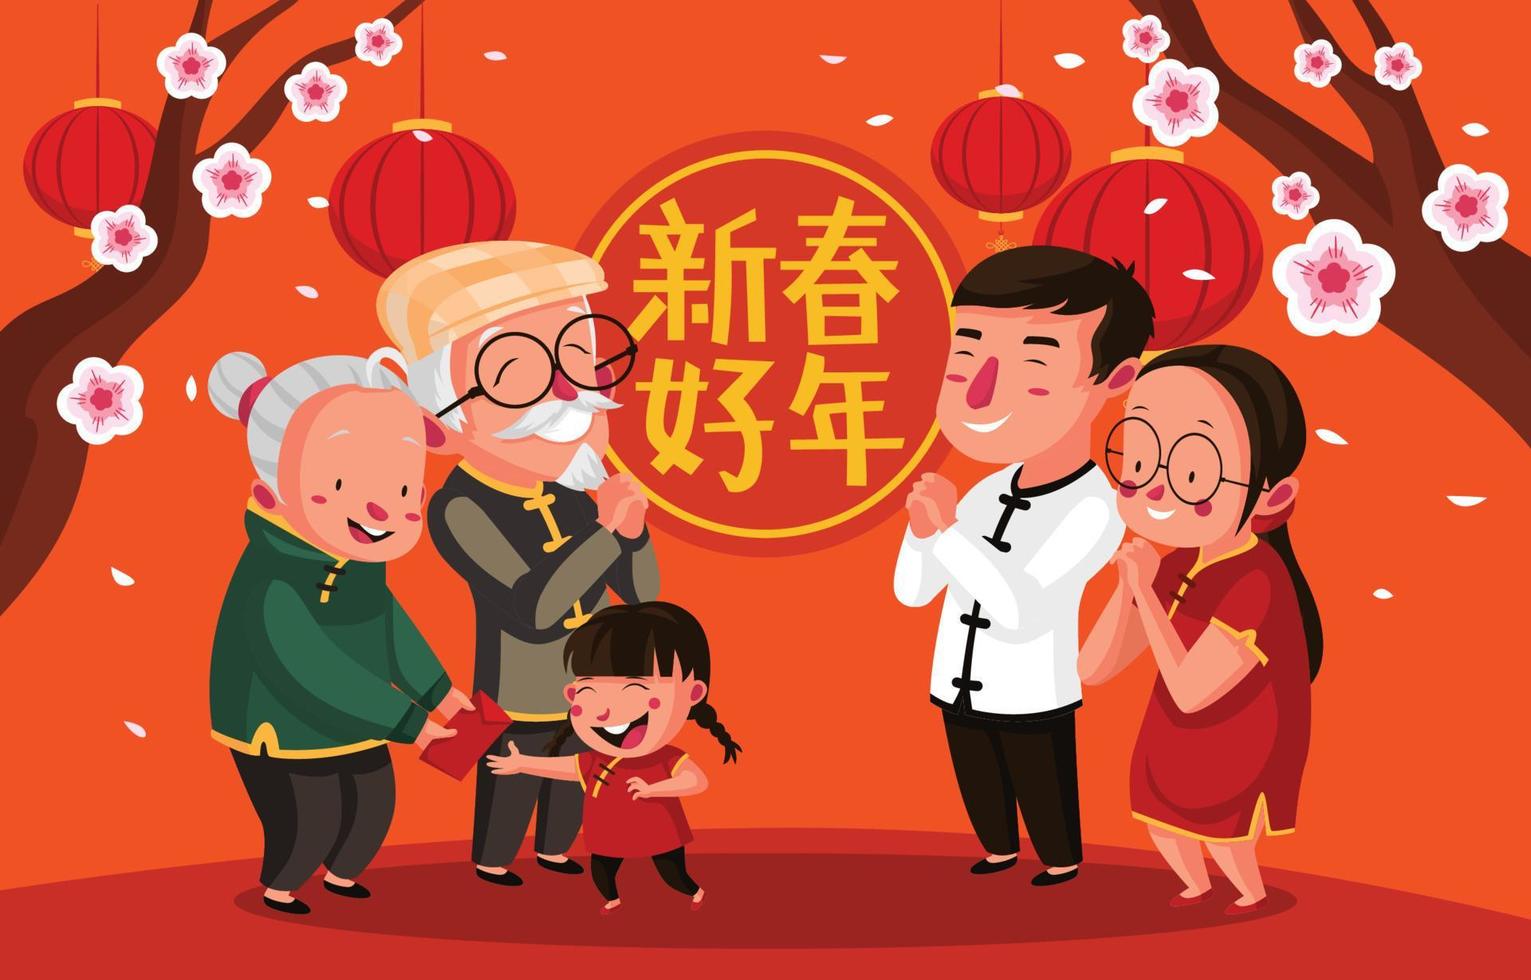 gong xi fa cai viering met familie vector